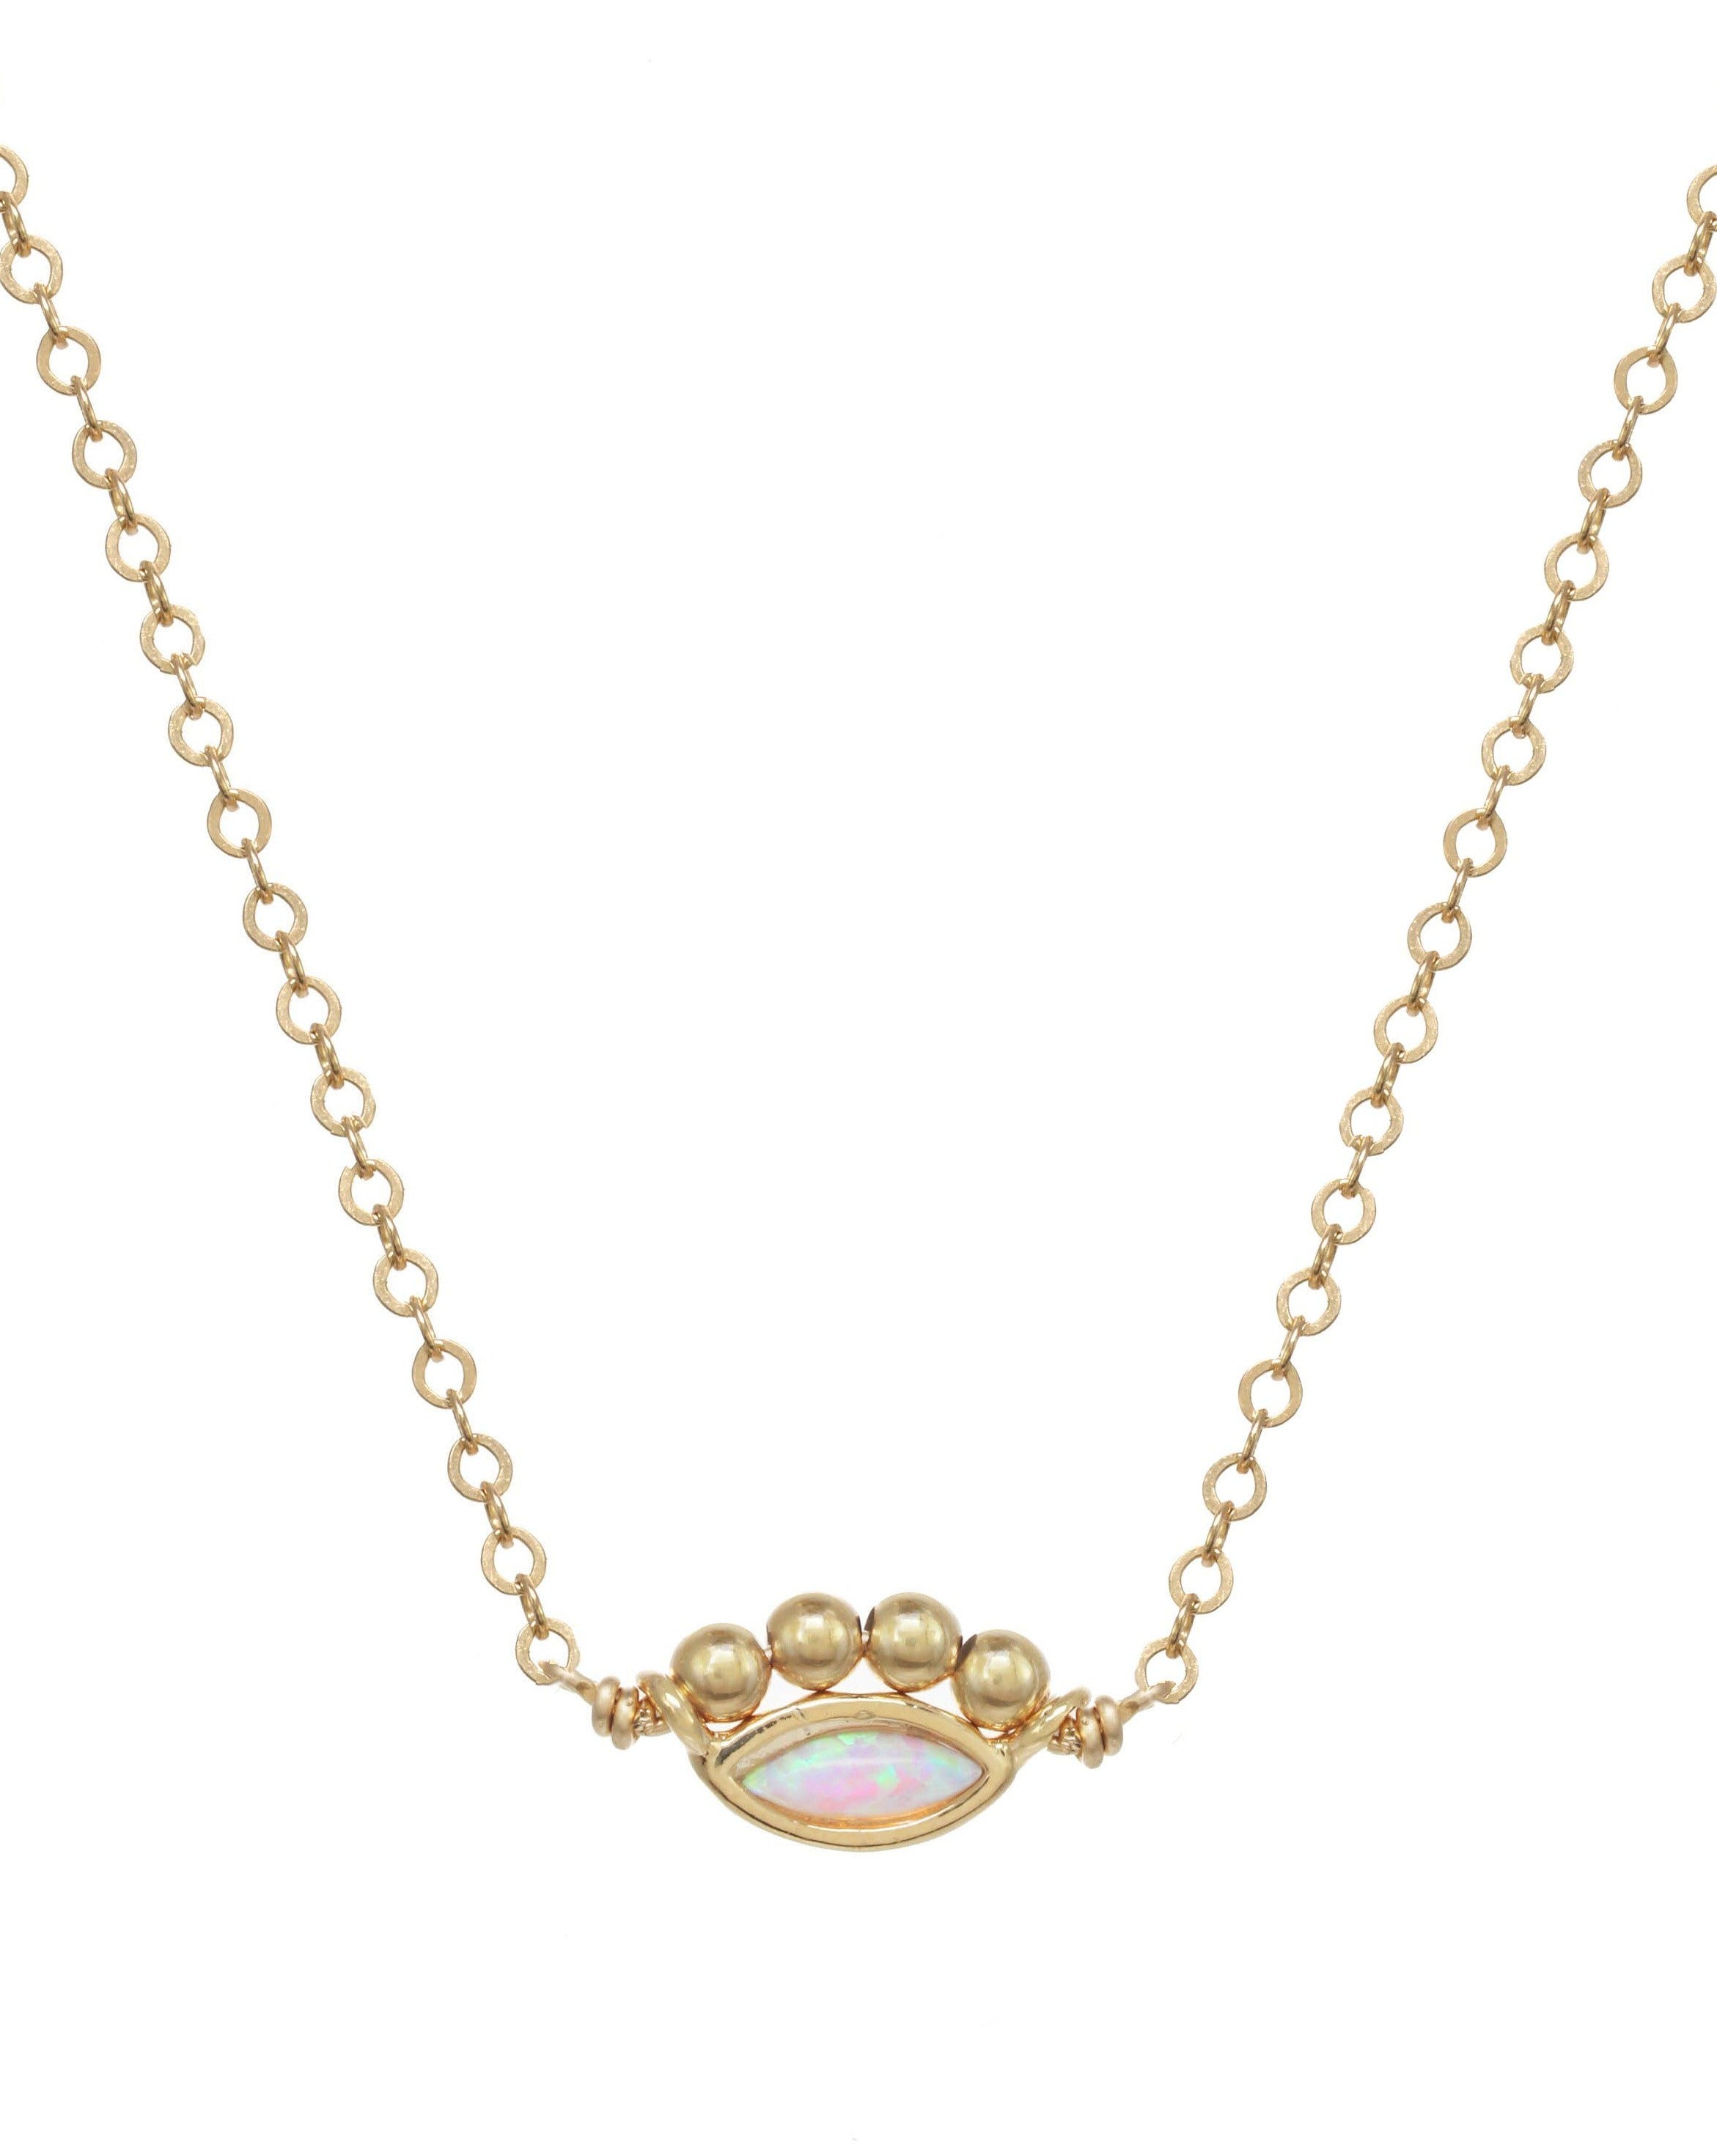 Ailbee Necklace by KOZAKH. A 16 to 18 inch adjustable length necklace in 14K Gold Filled, featuring a Marquise Opal charm and 2mm Gold Filled balls.